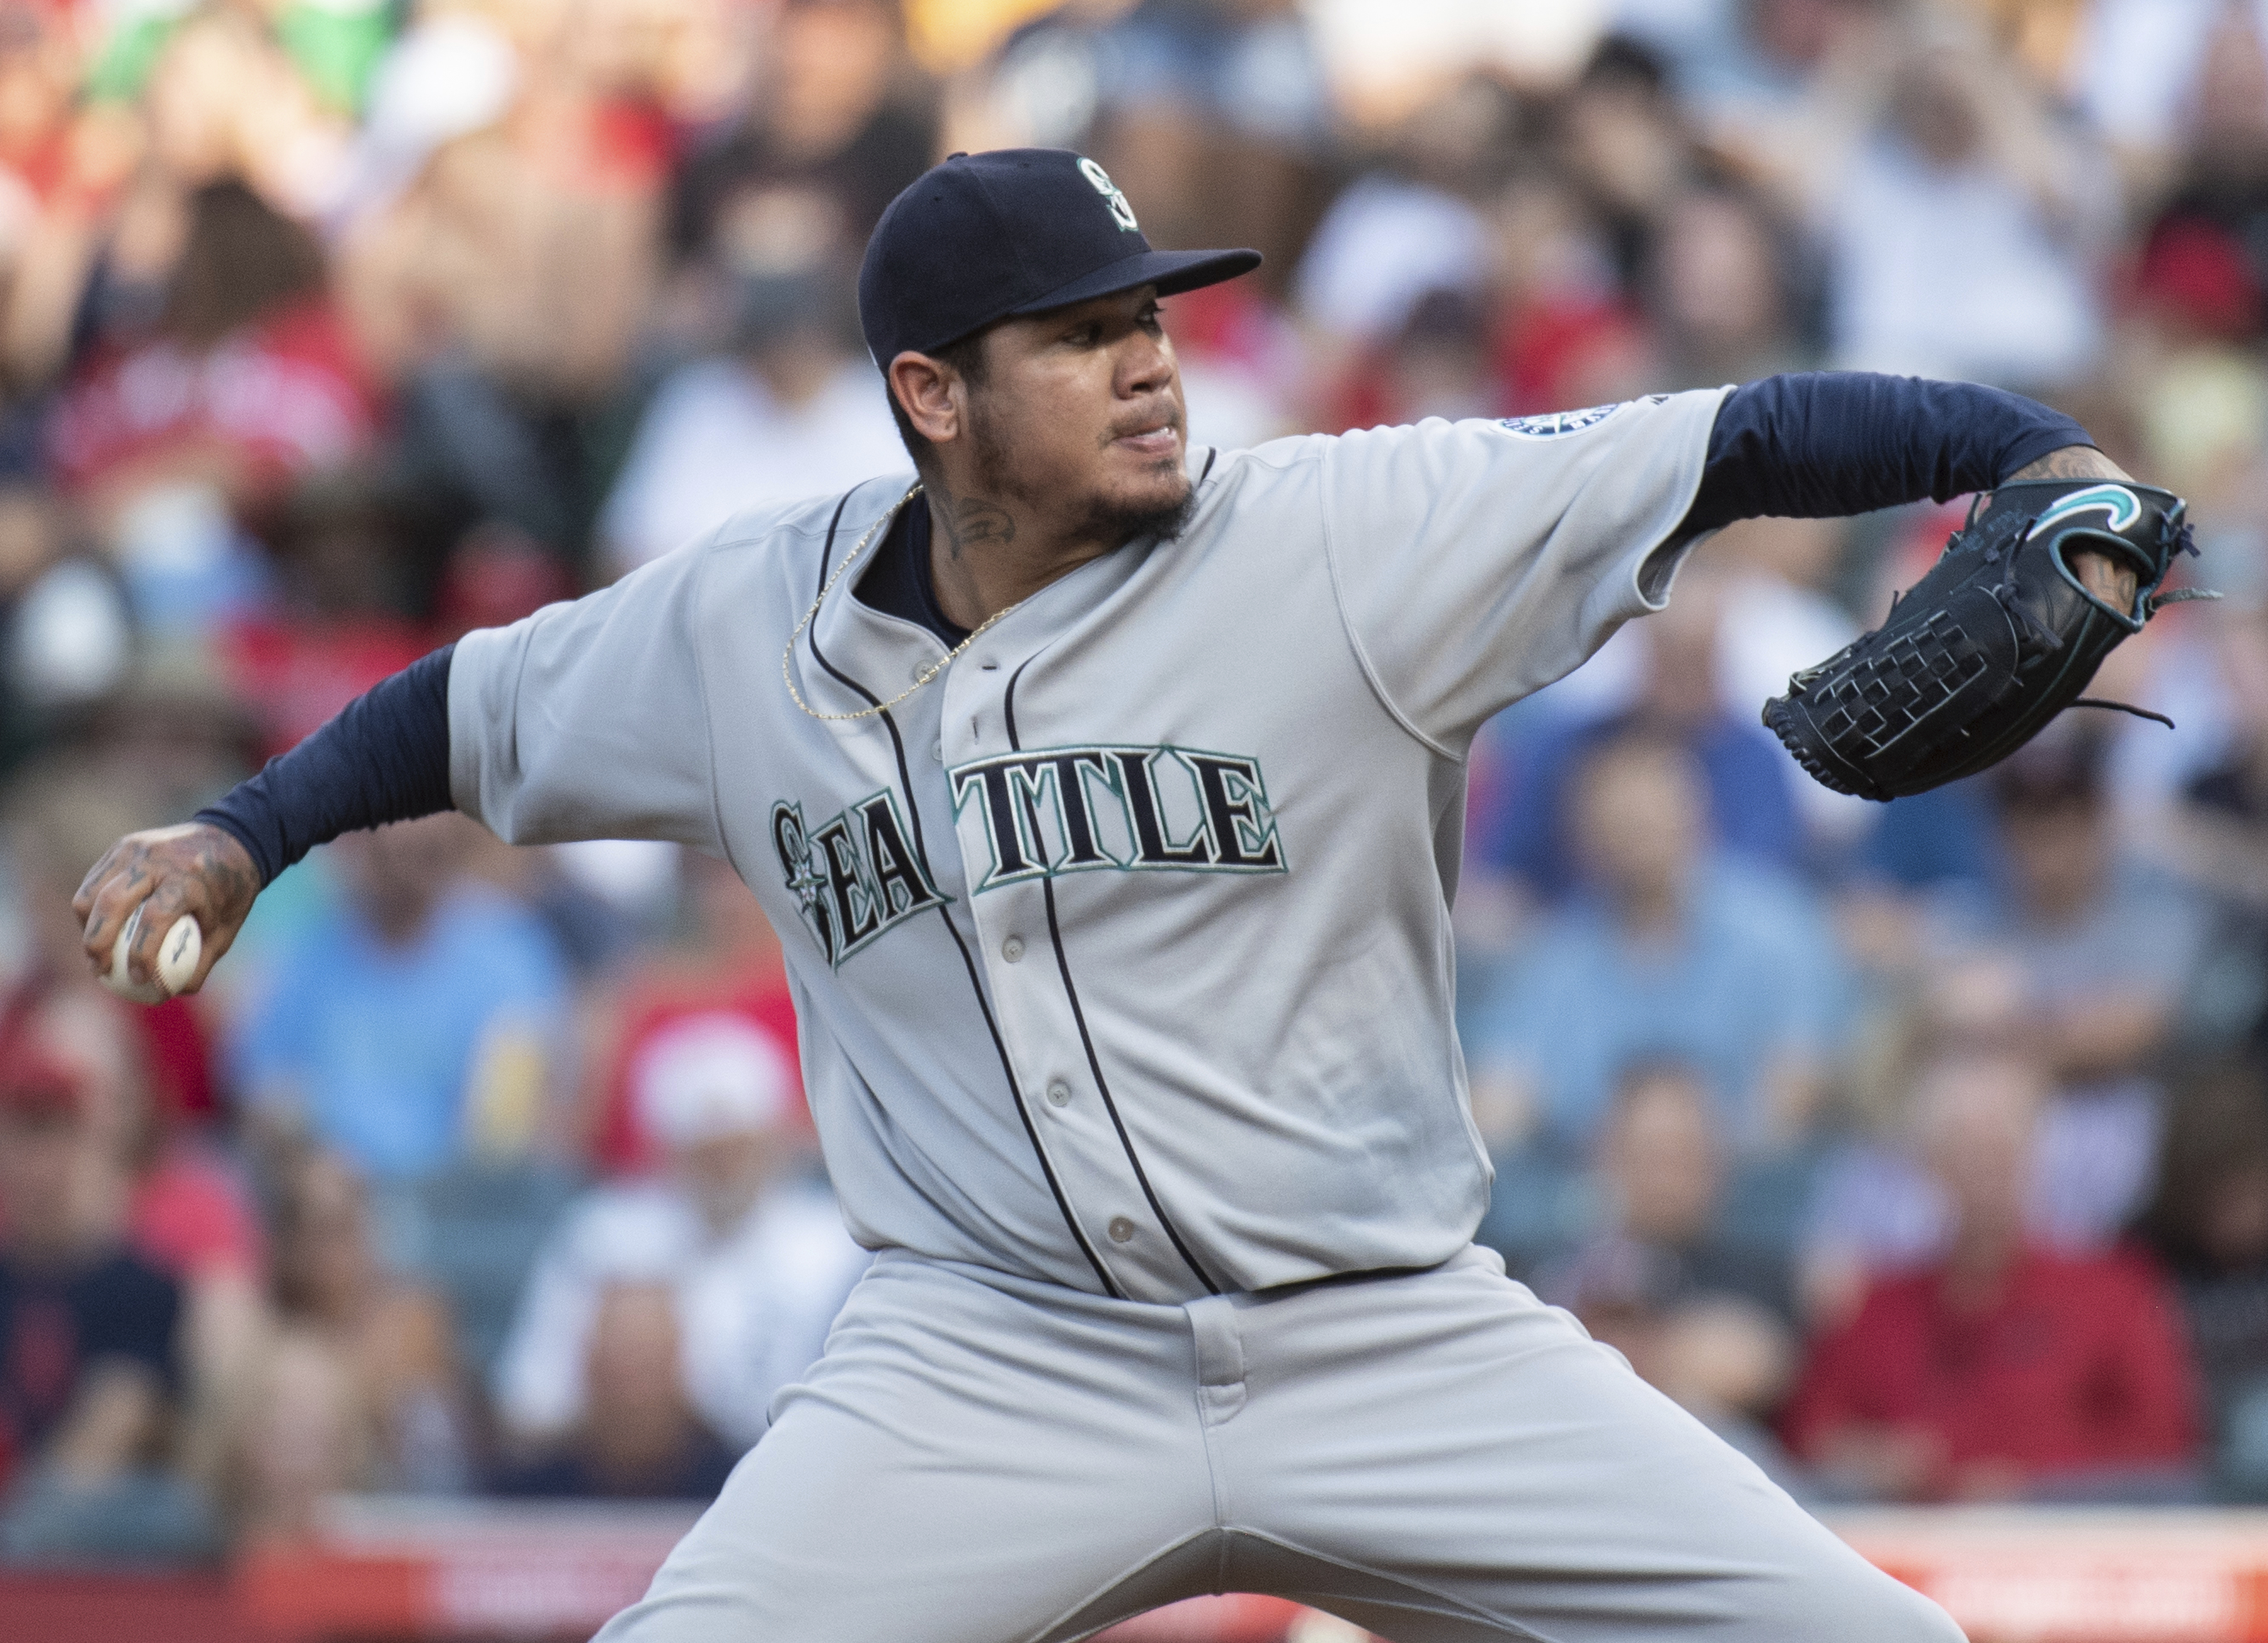 Shaky Hernandez vows to return to Mariners' rotation soon